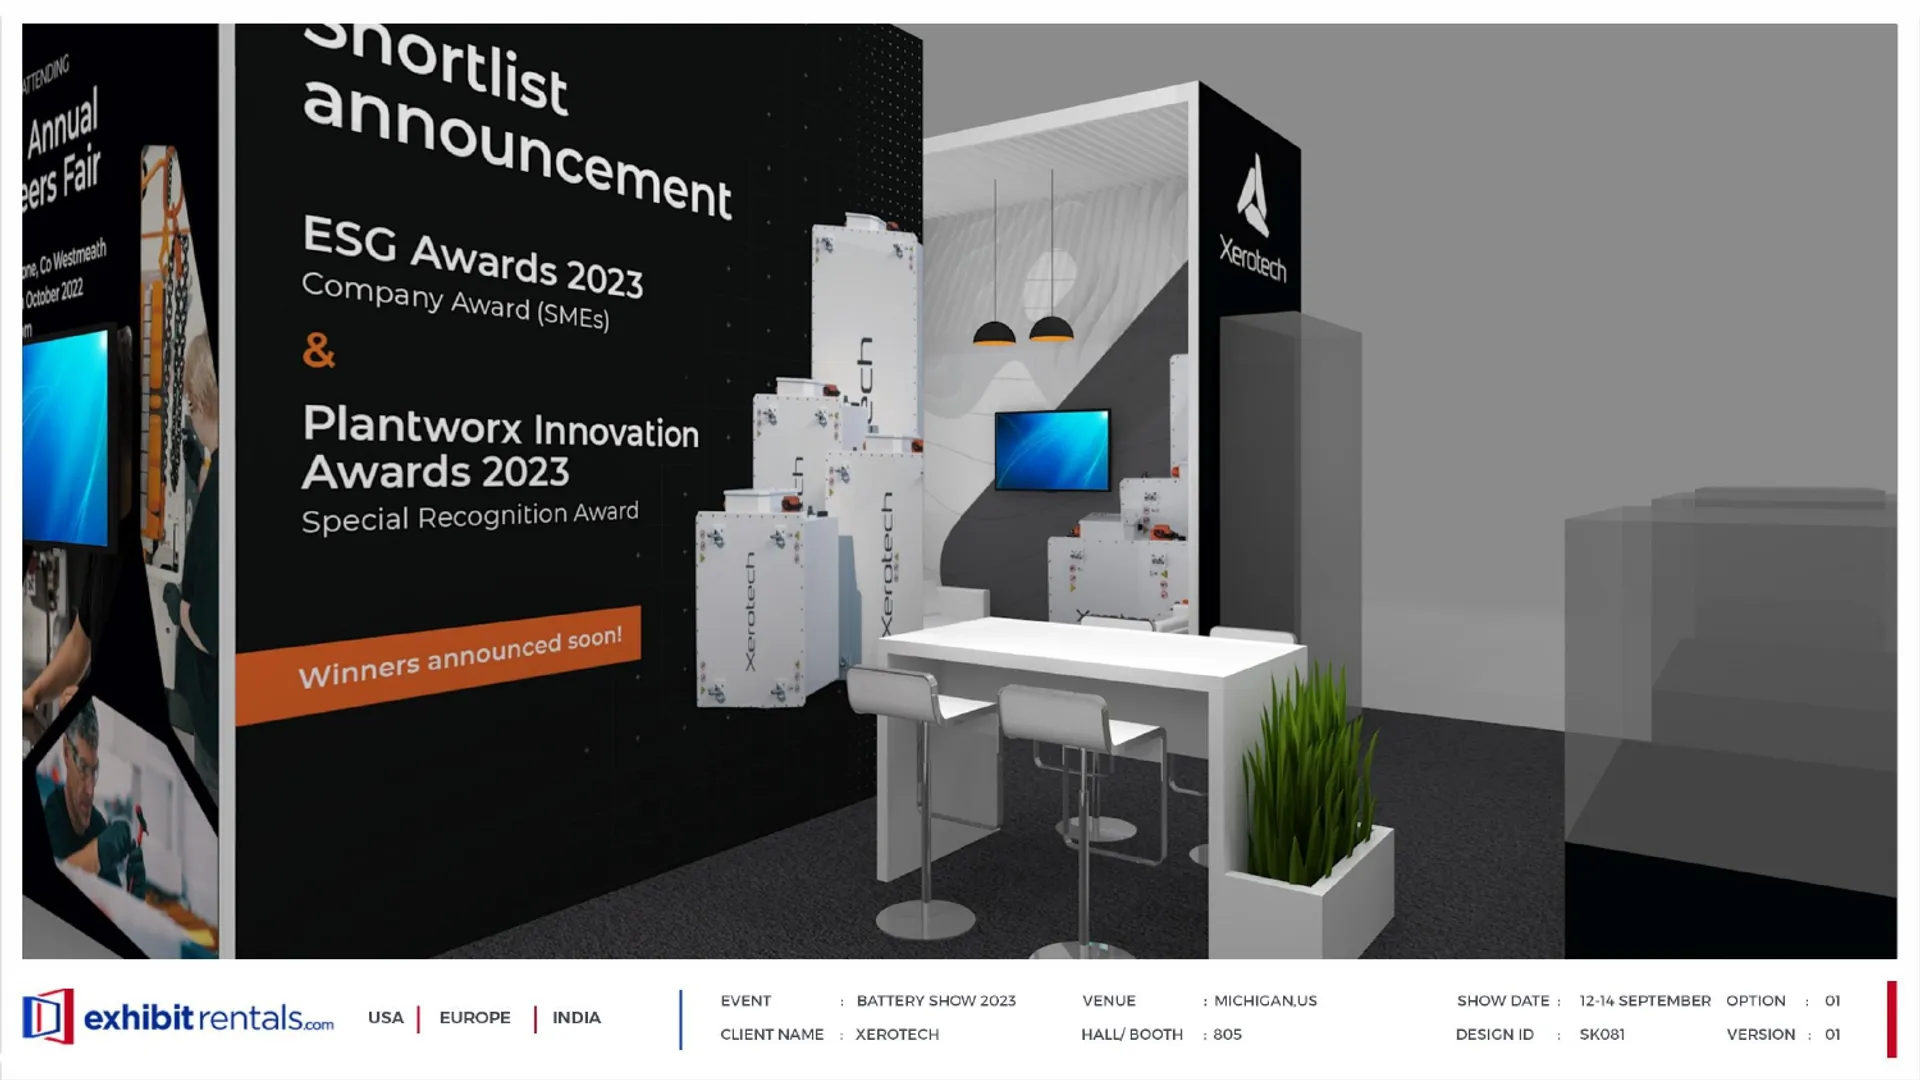 booth-design-projects/Exhibit-Rentals/2024-04-17-20x20-PENINSULA-Project-111/1.1 - Xerotech - ER Design Presentation.pptx-15_page-0001-vjvxl.jpg